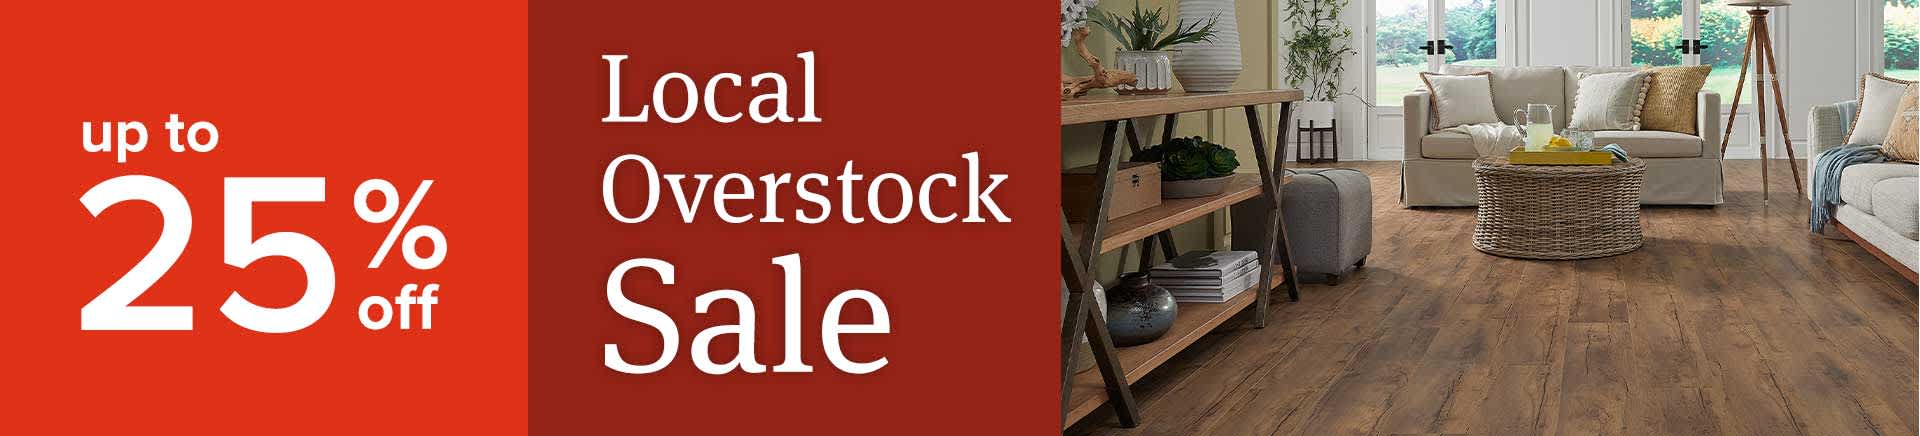 up to 25 percent off Local Overstock Sale